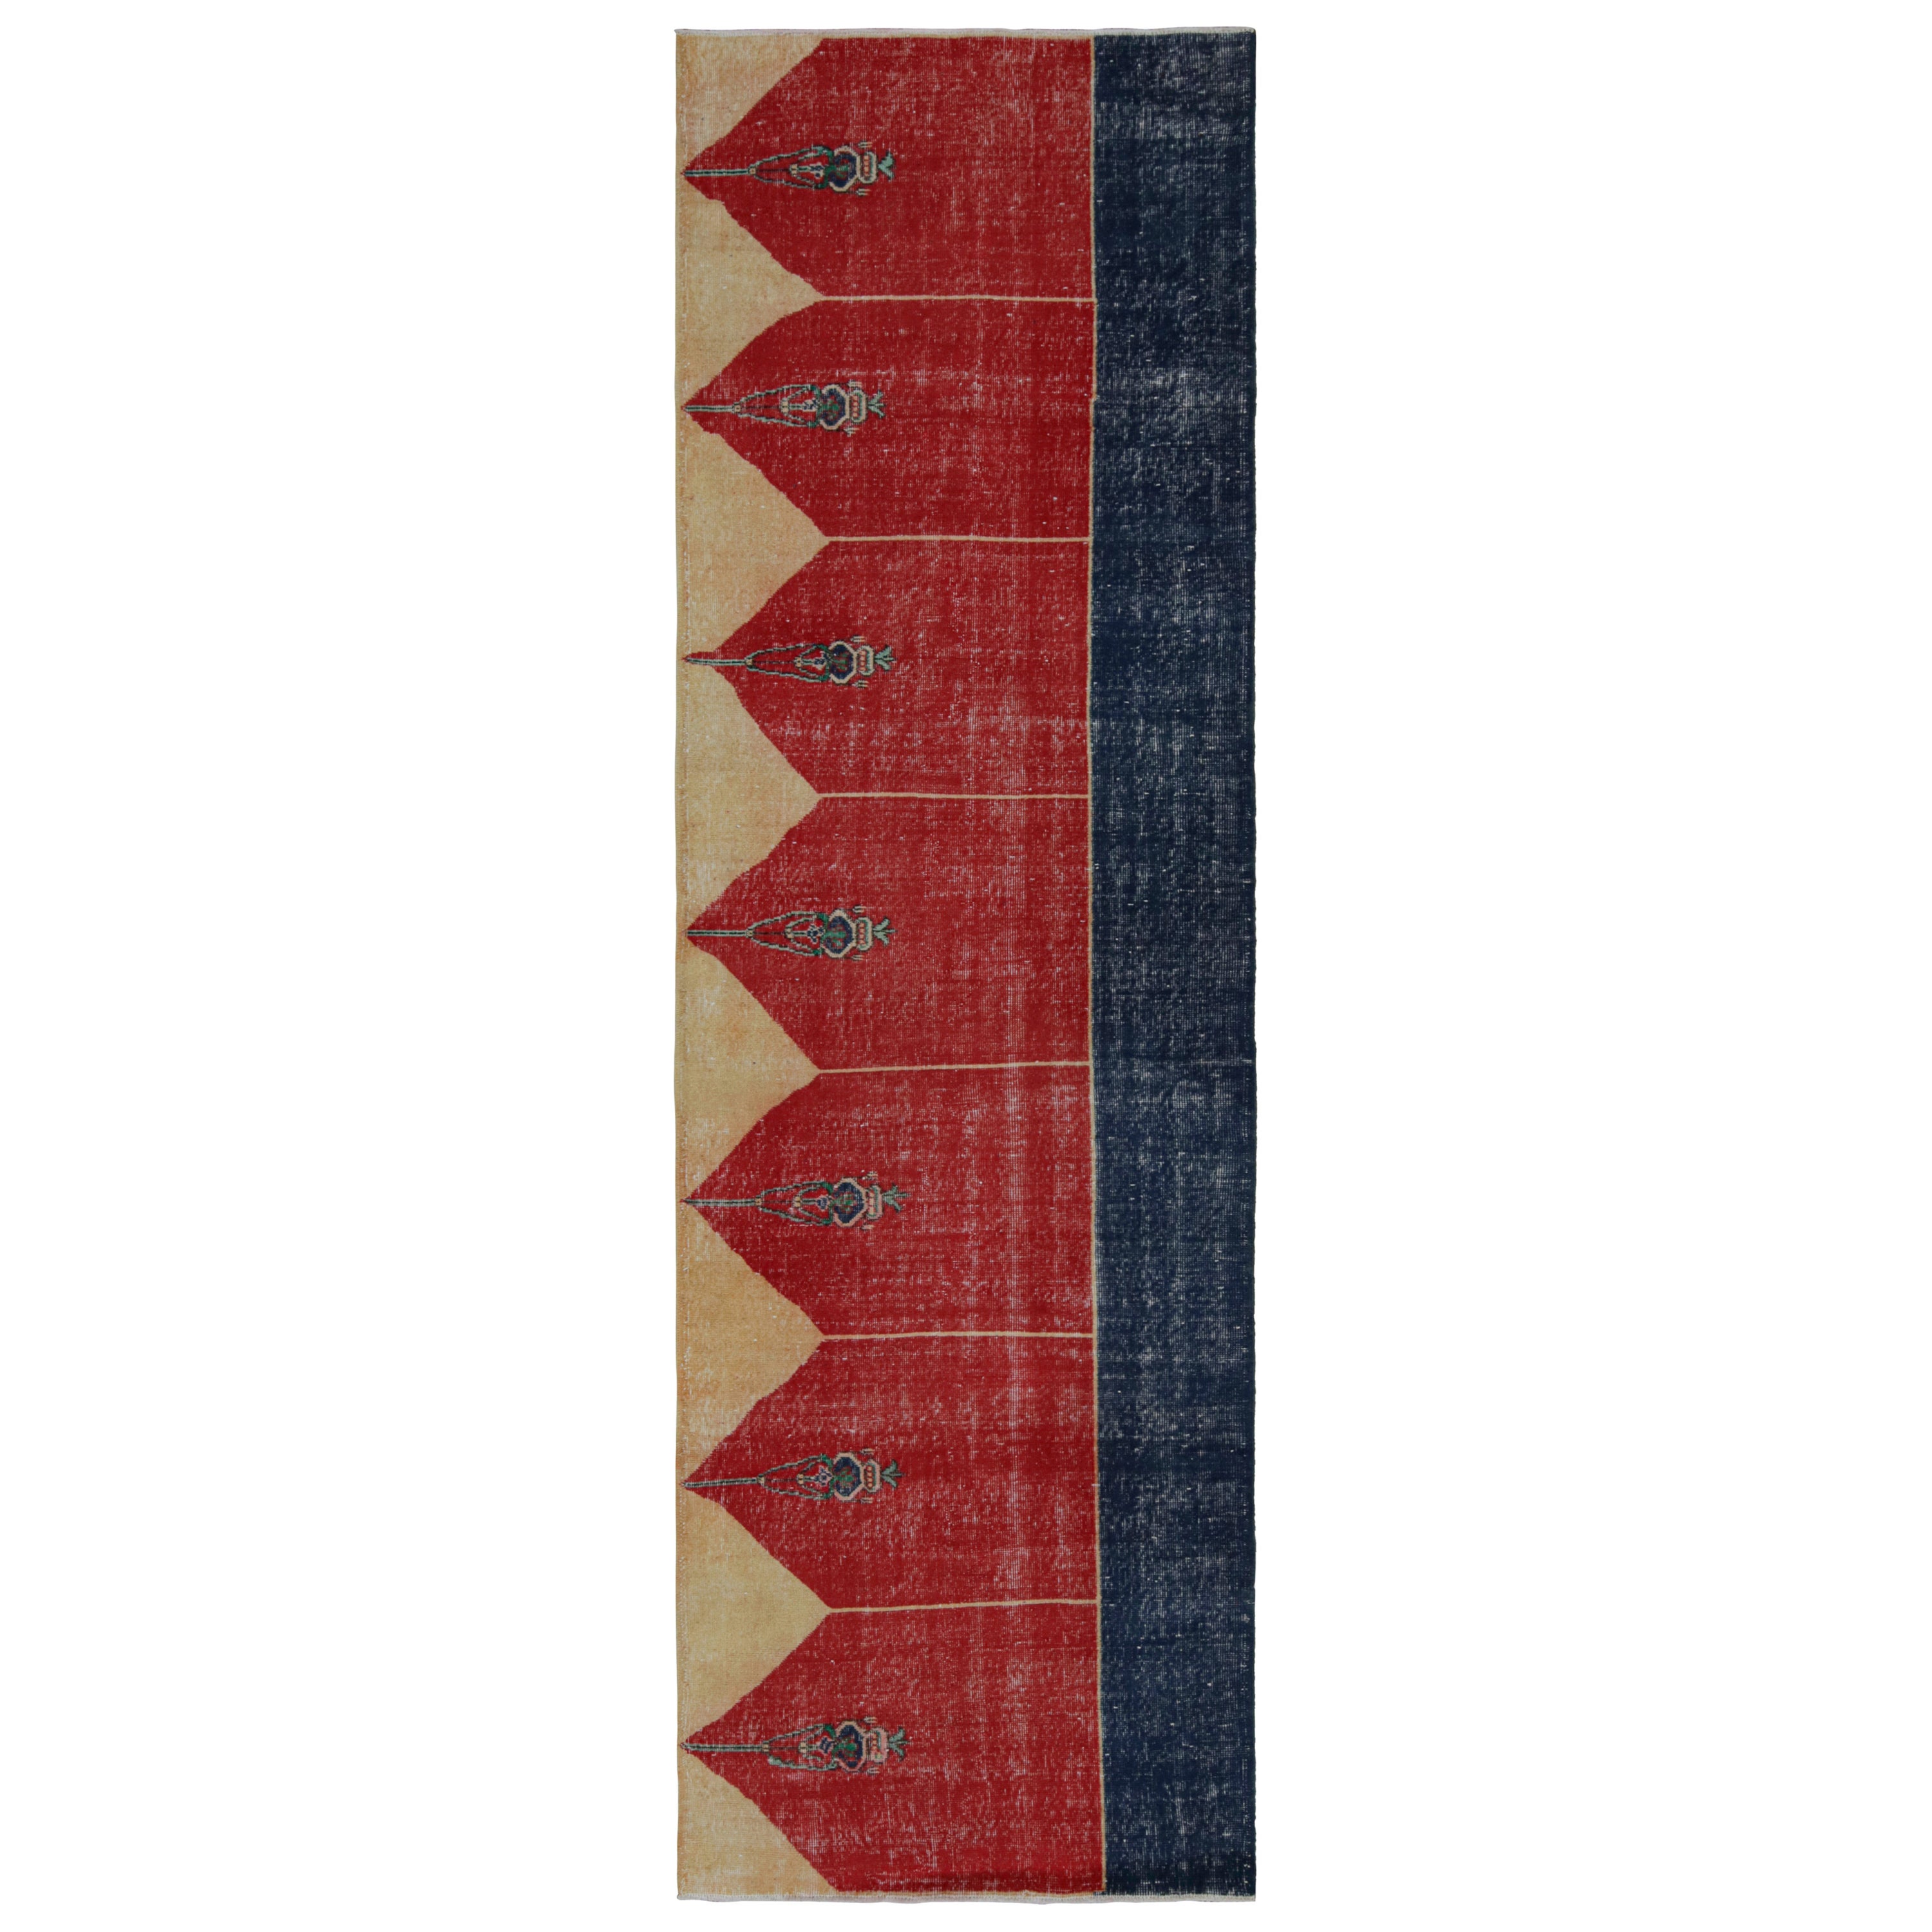 Vintage Turkish runner rug in Red, Blue and Gold Patterns by Rug & Kilim